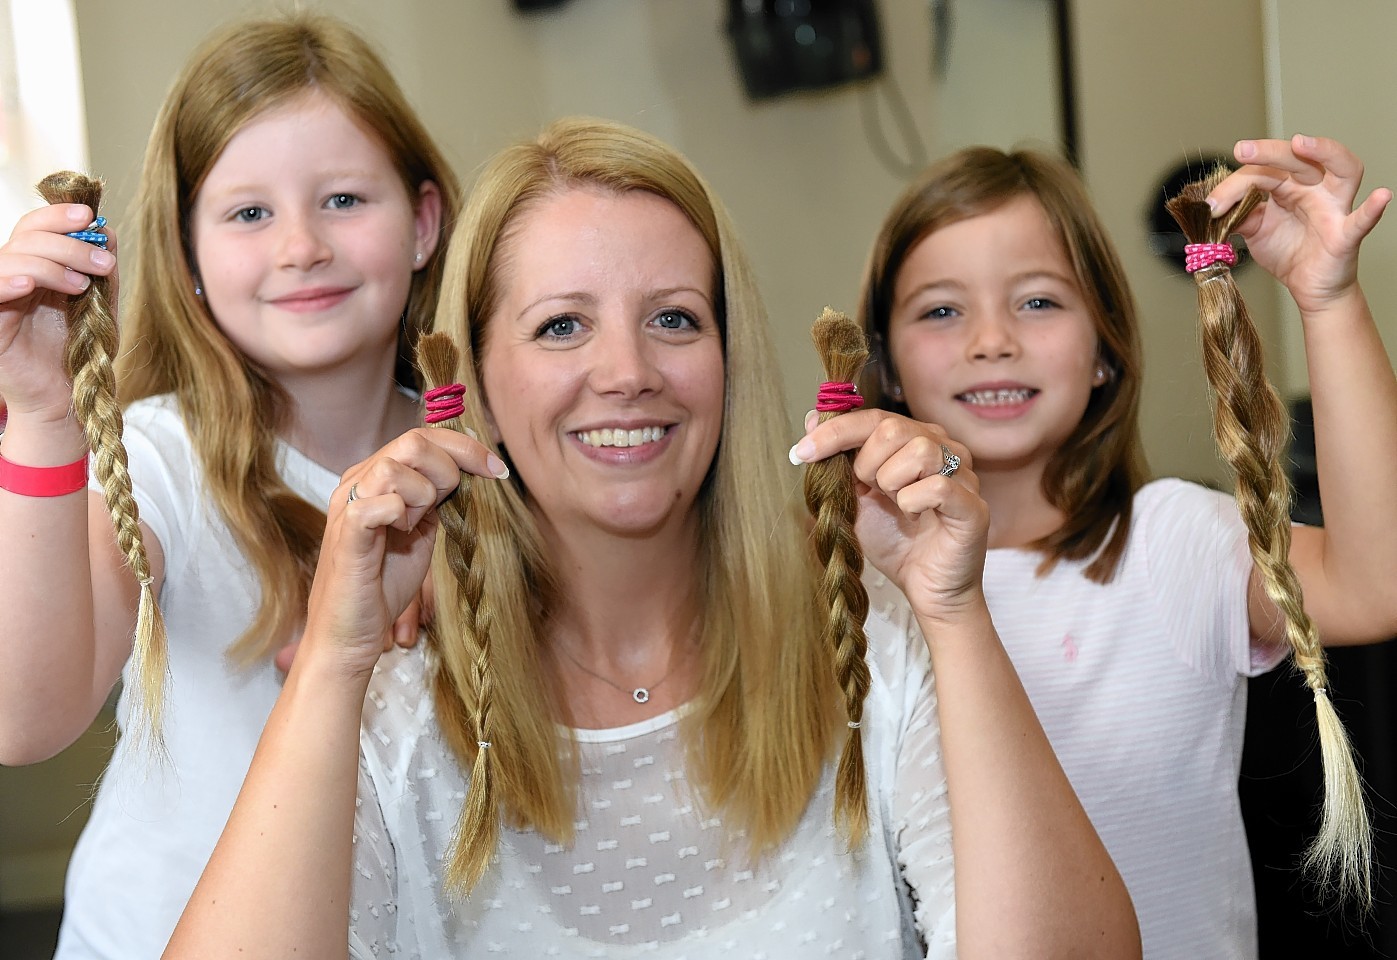 Summer, Pamela and Amber Cameron have donated their hair to the Little Princess Trust